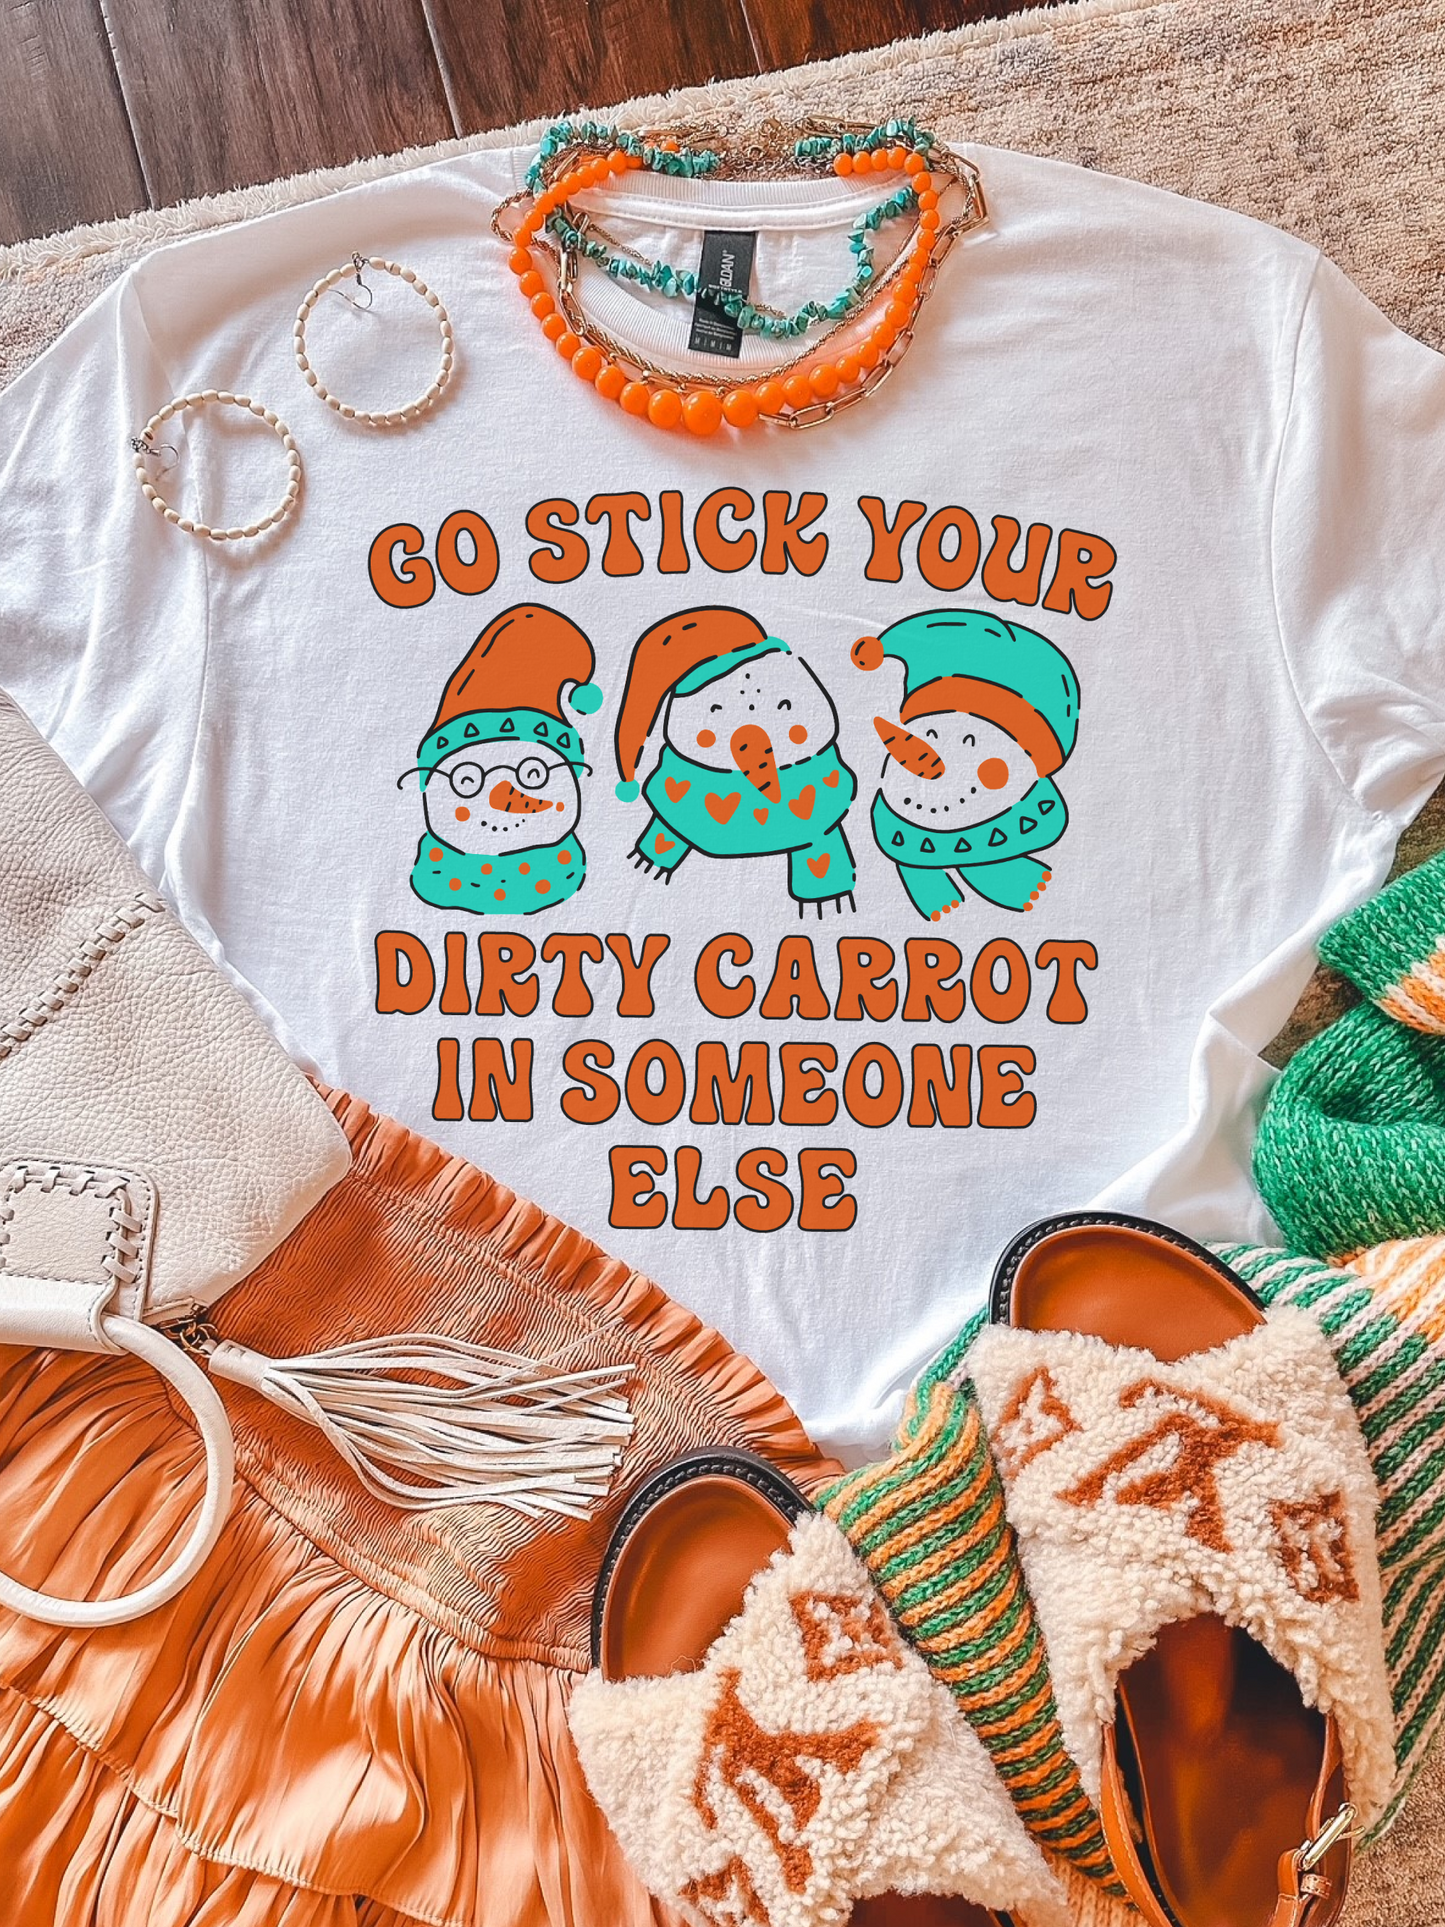 Go Stick Your Dirty Carrot In Someone Else